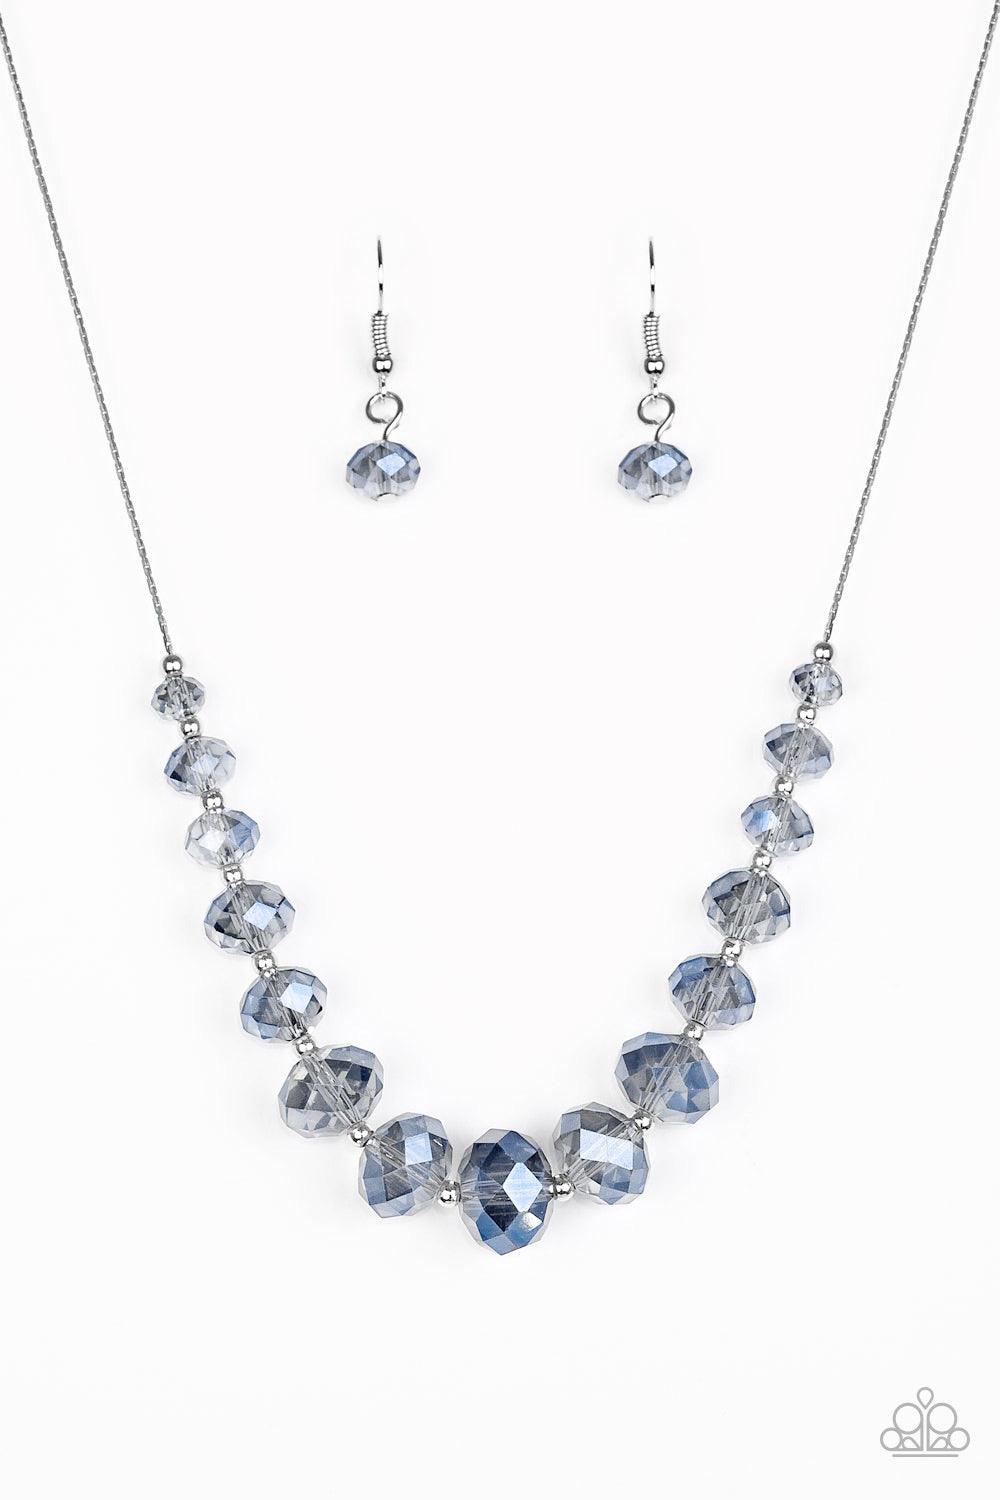 Paparazzi Accessories Crystal Carriages - Blue Iridescent blue crystal-like beads and dainty silver beads are threaded along a flat silver chain below the collar. The sparkling crystal-like beads gradually increase in size near the center for a refined fi